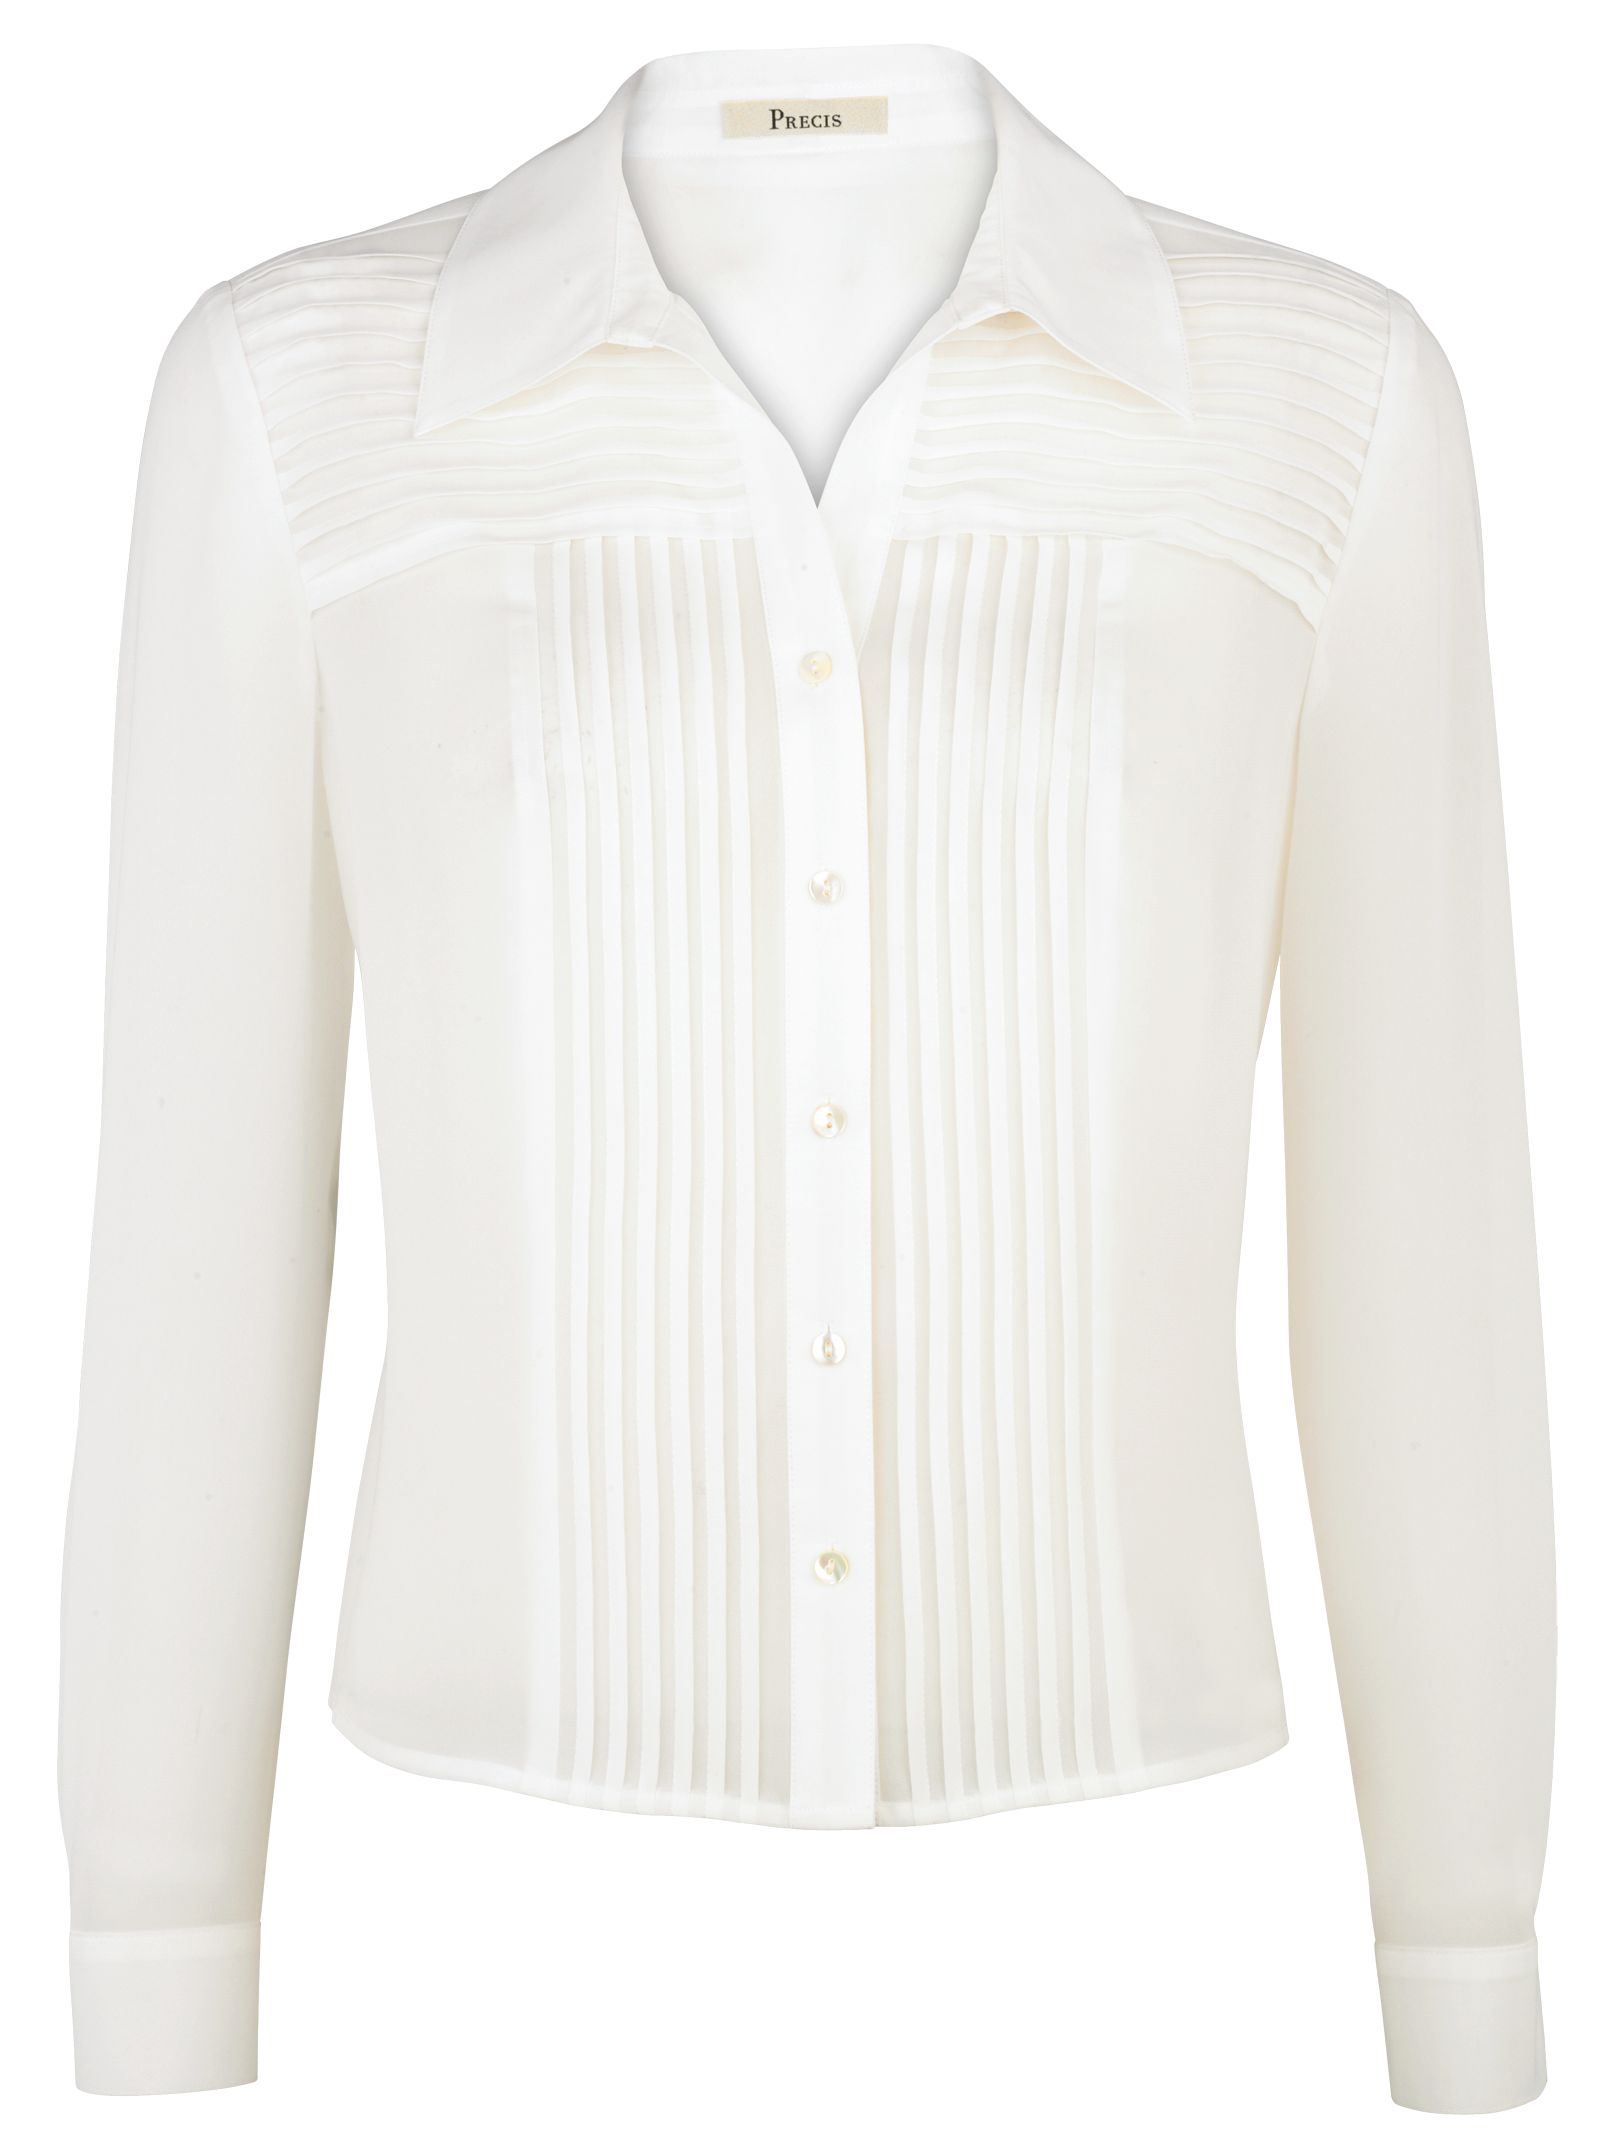 Pleated Blouse, Ivory